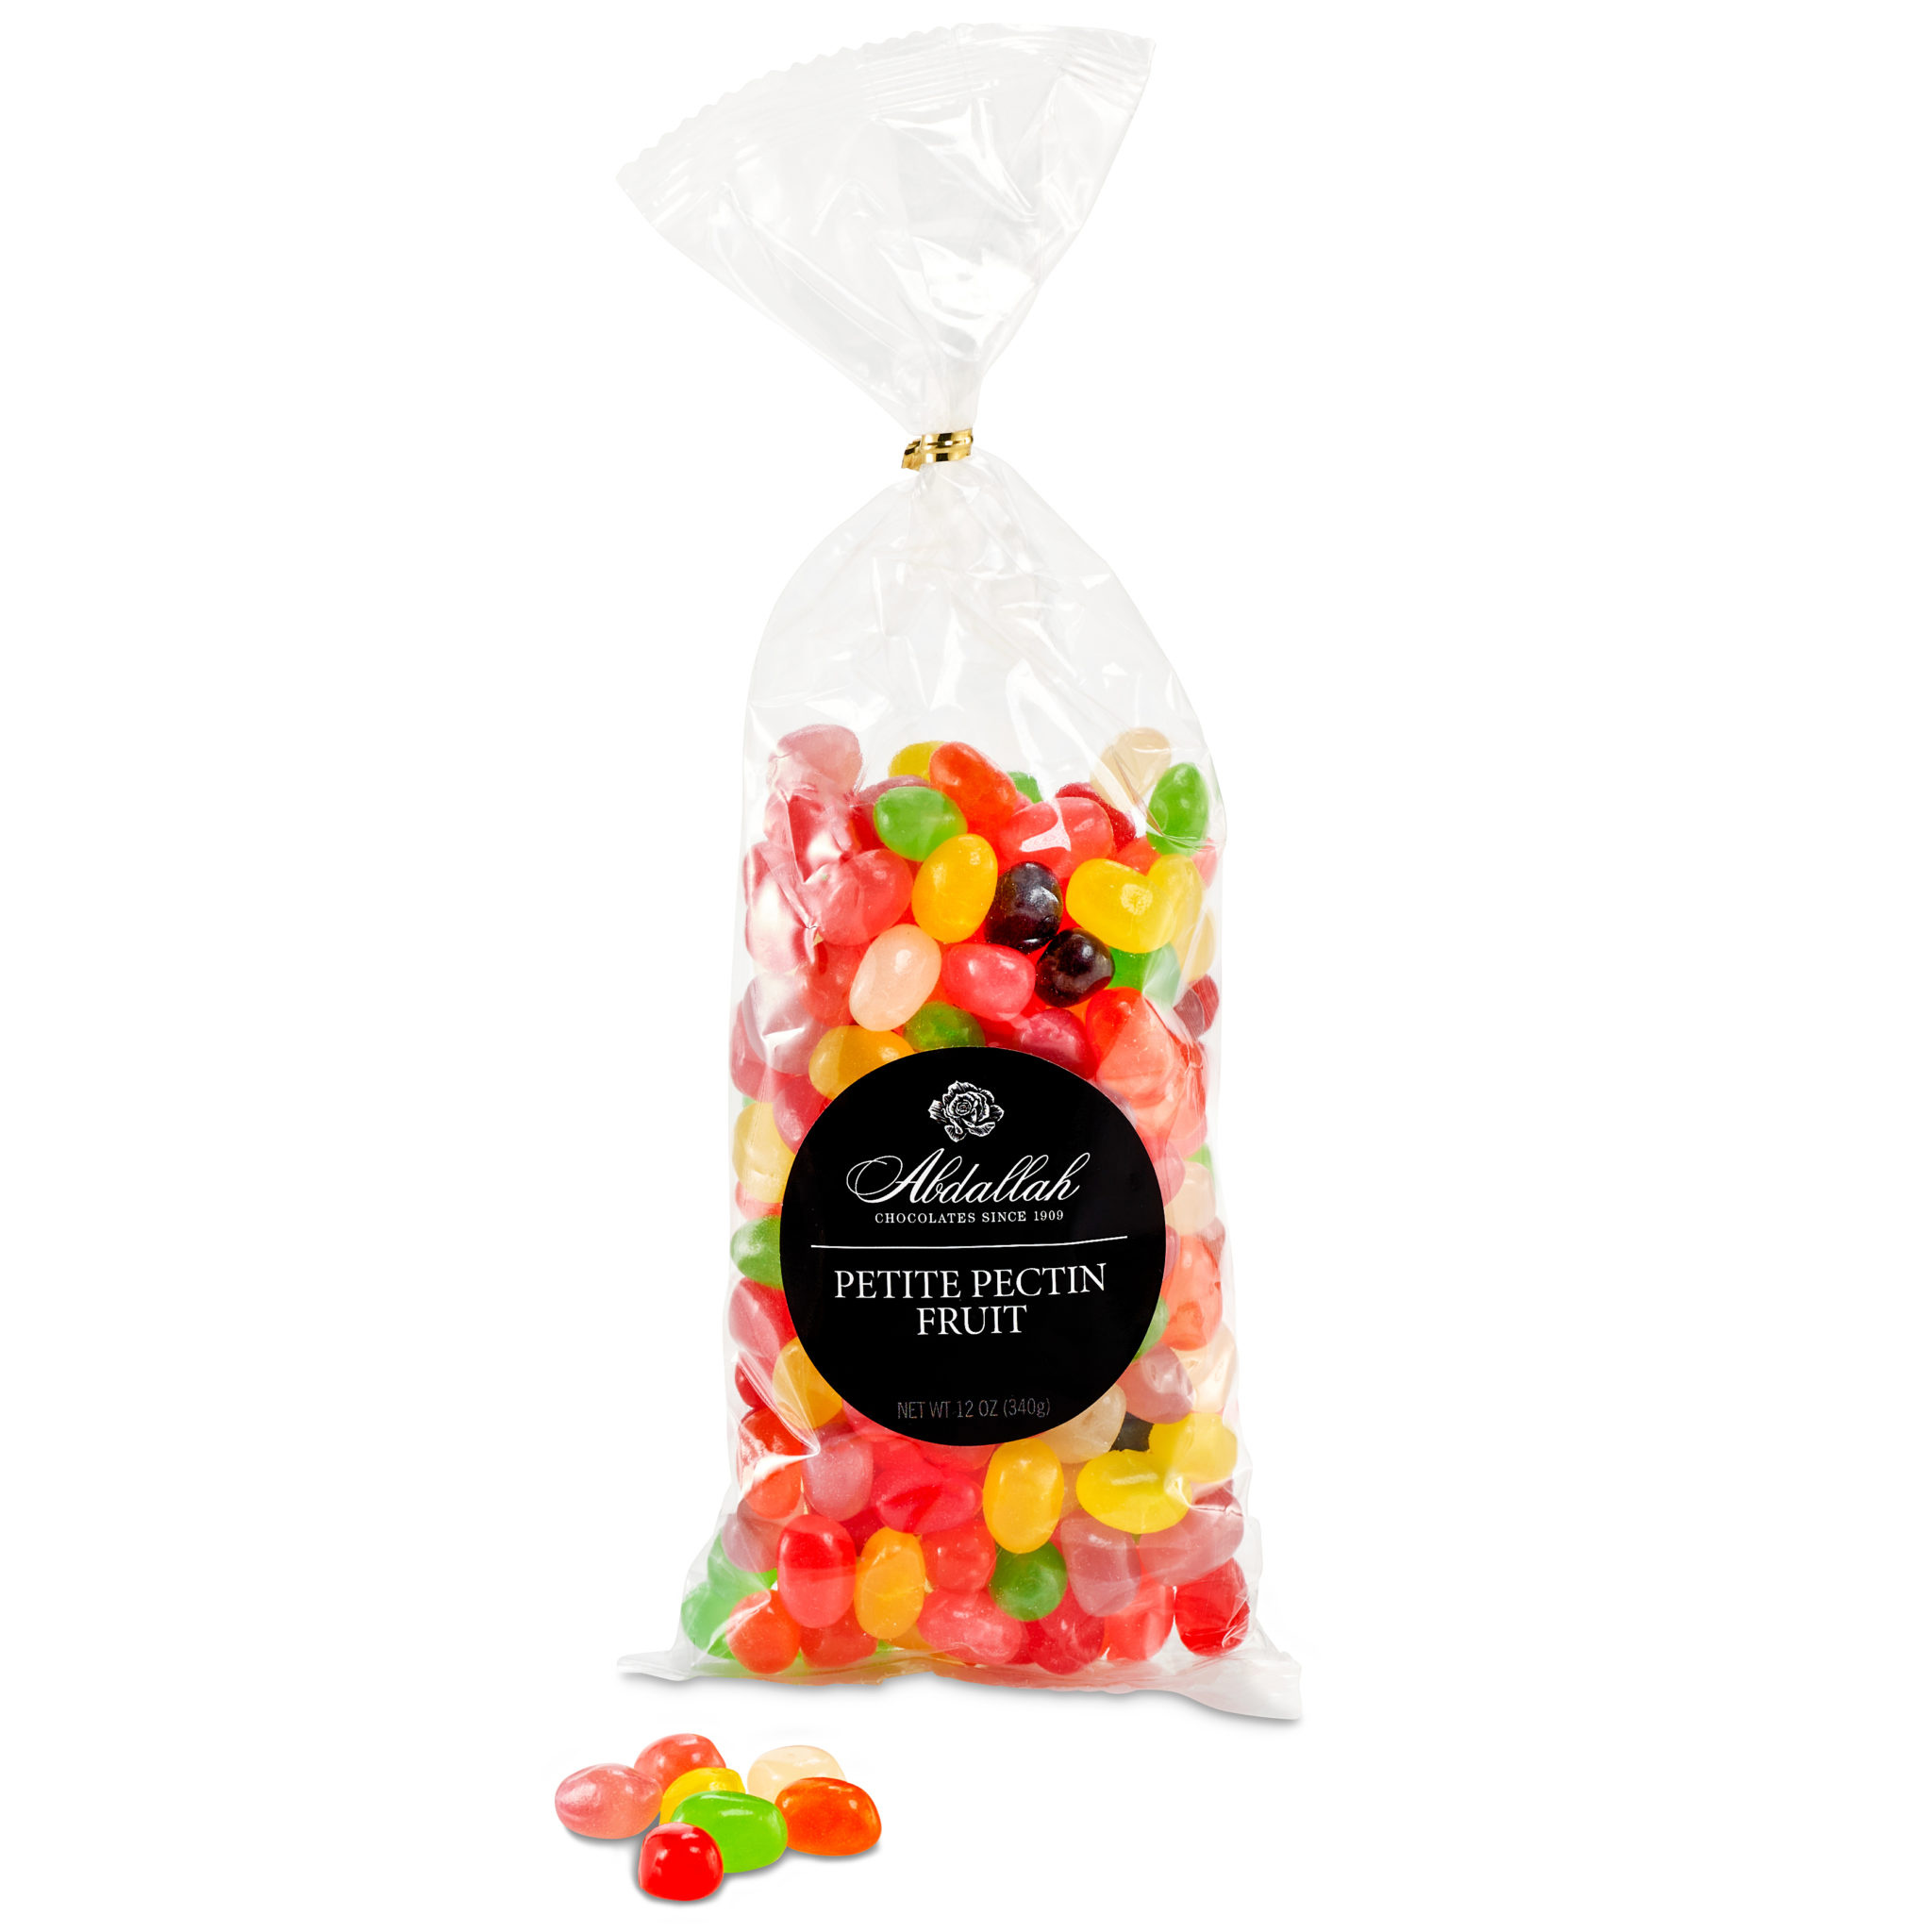 Fruit-flavored jelly beans, Burst of freshness, Gourmet candies, Premium confection, 2050x2050 HD Handy